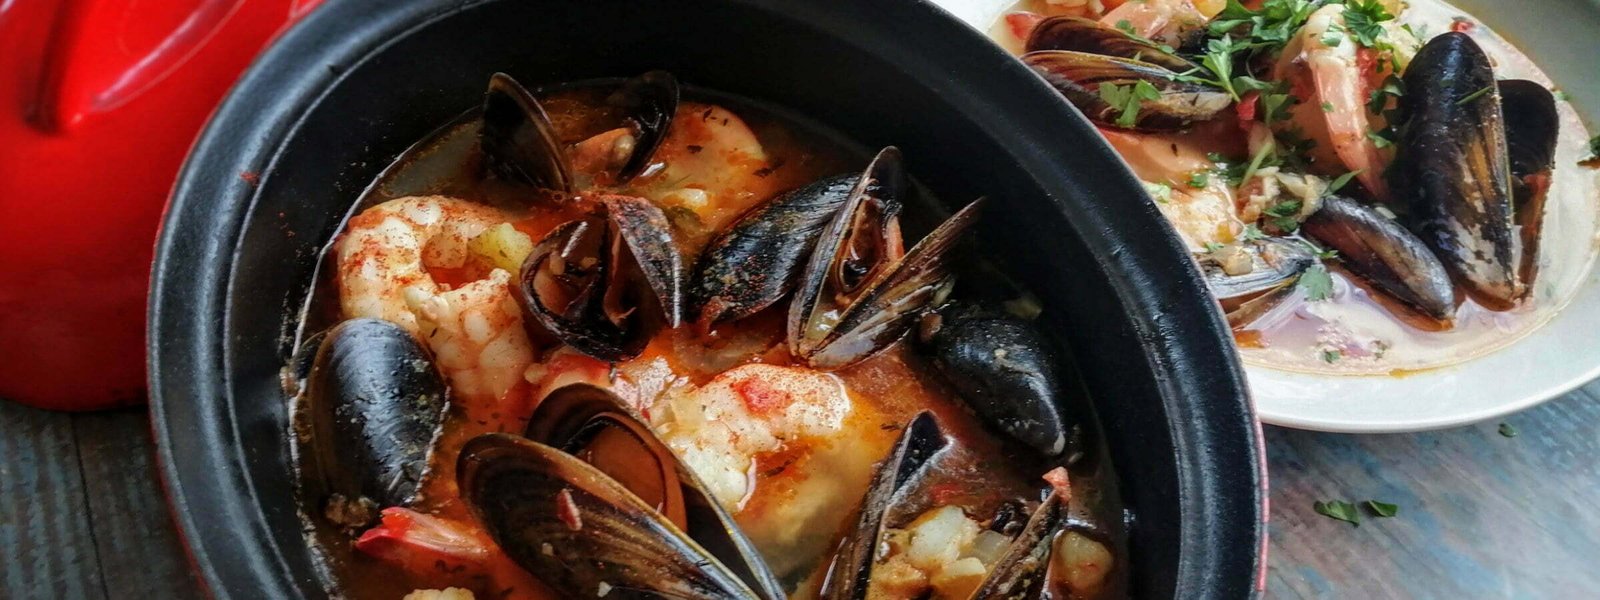 A steaming pot of Spanish seafood Stew sits beside a white bowl full of stew containing mussels, prawns and fish.